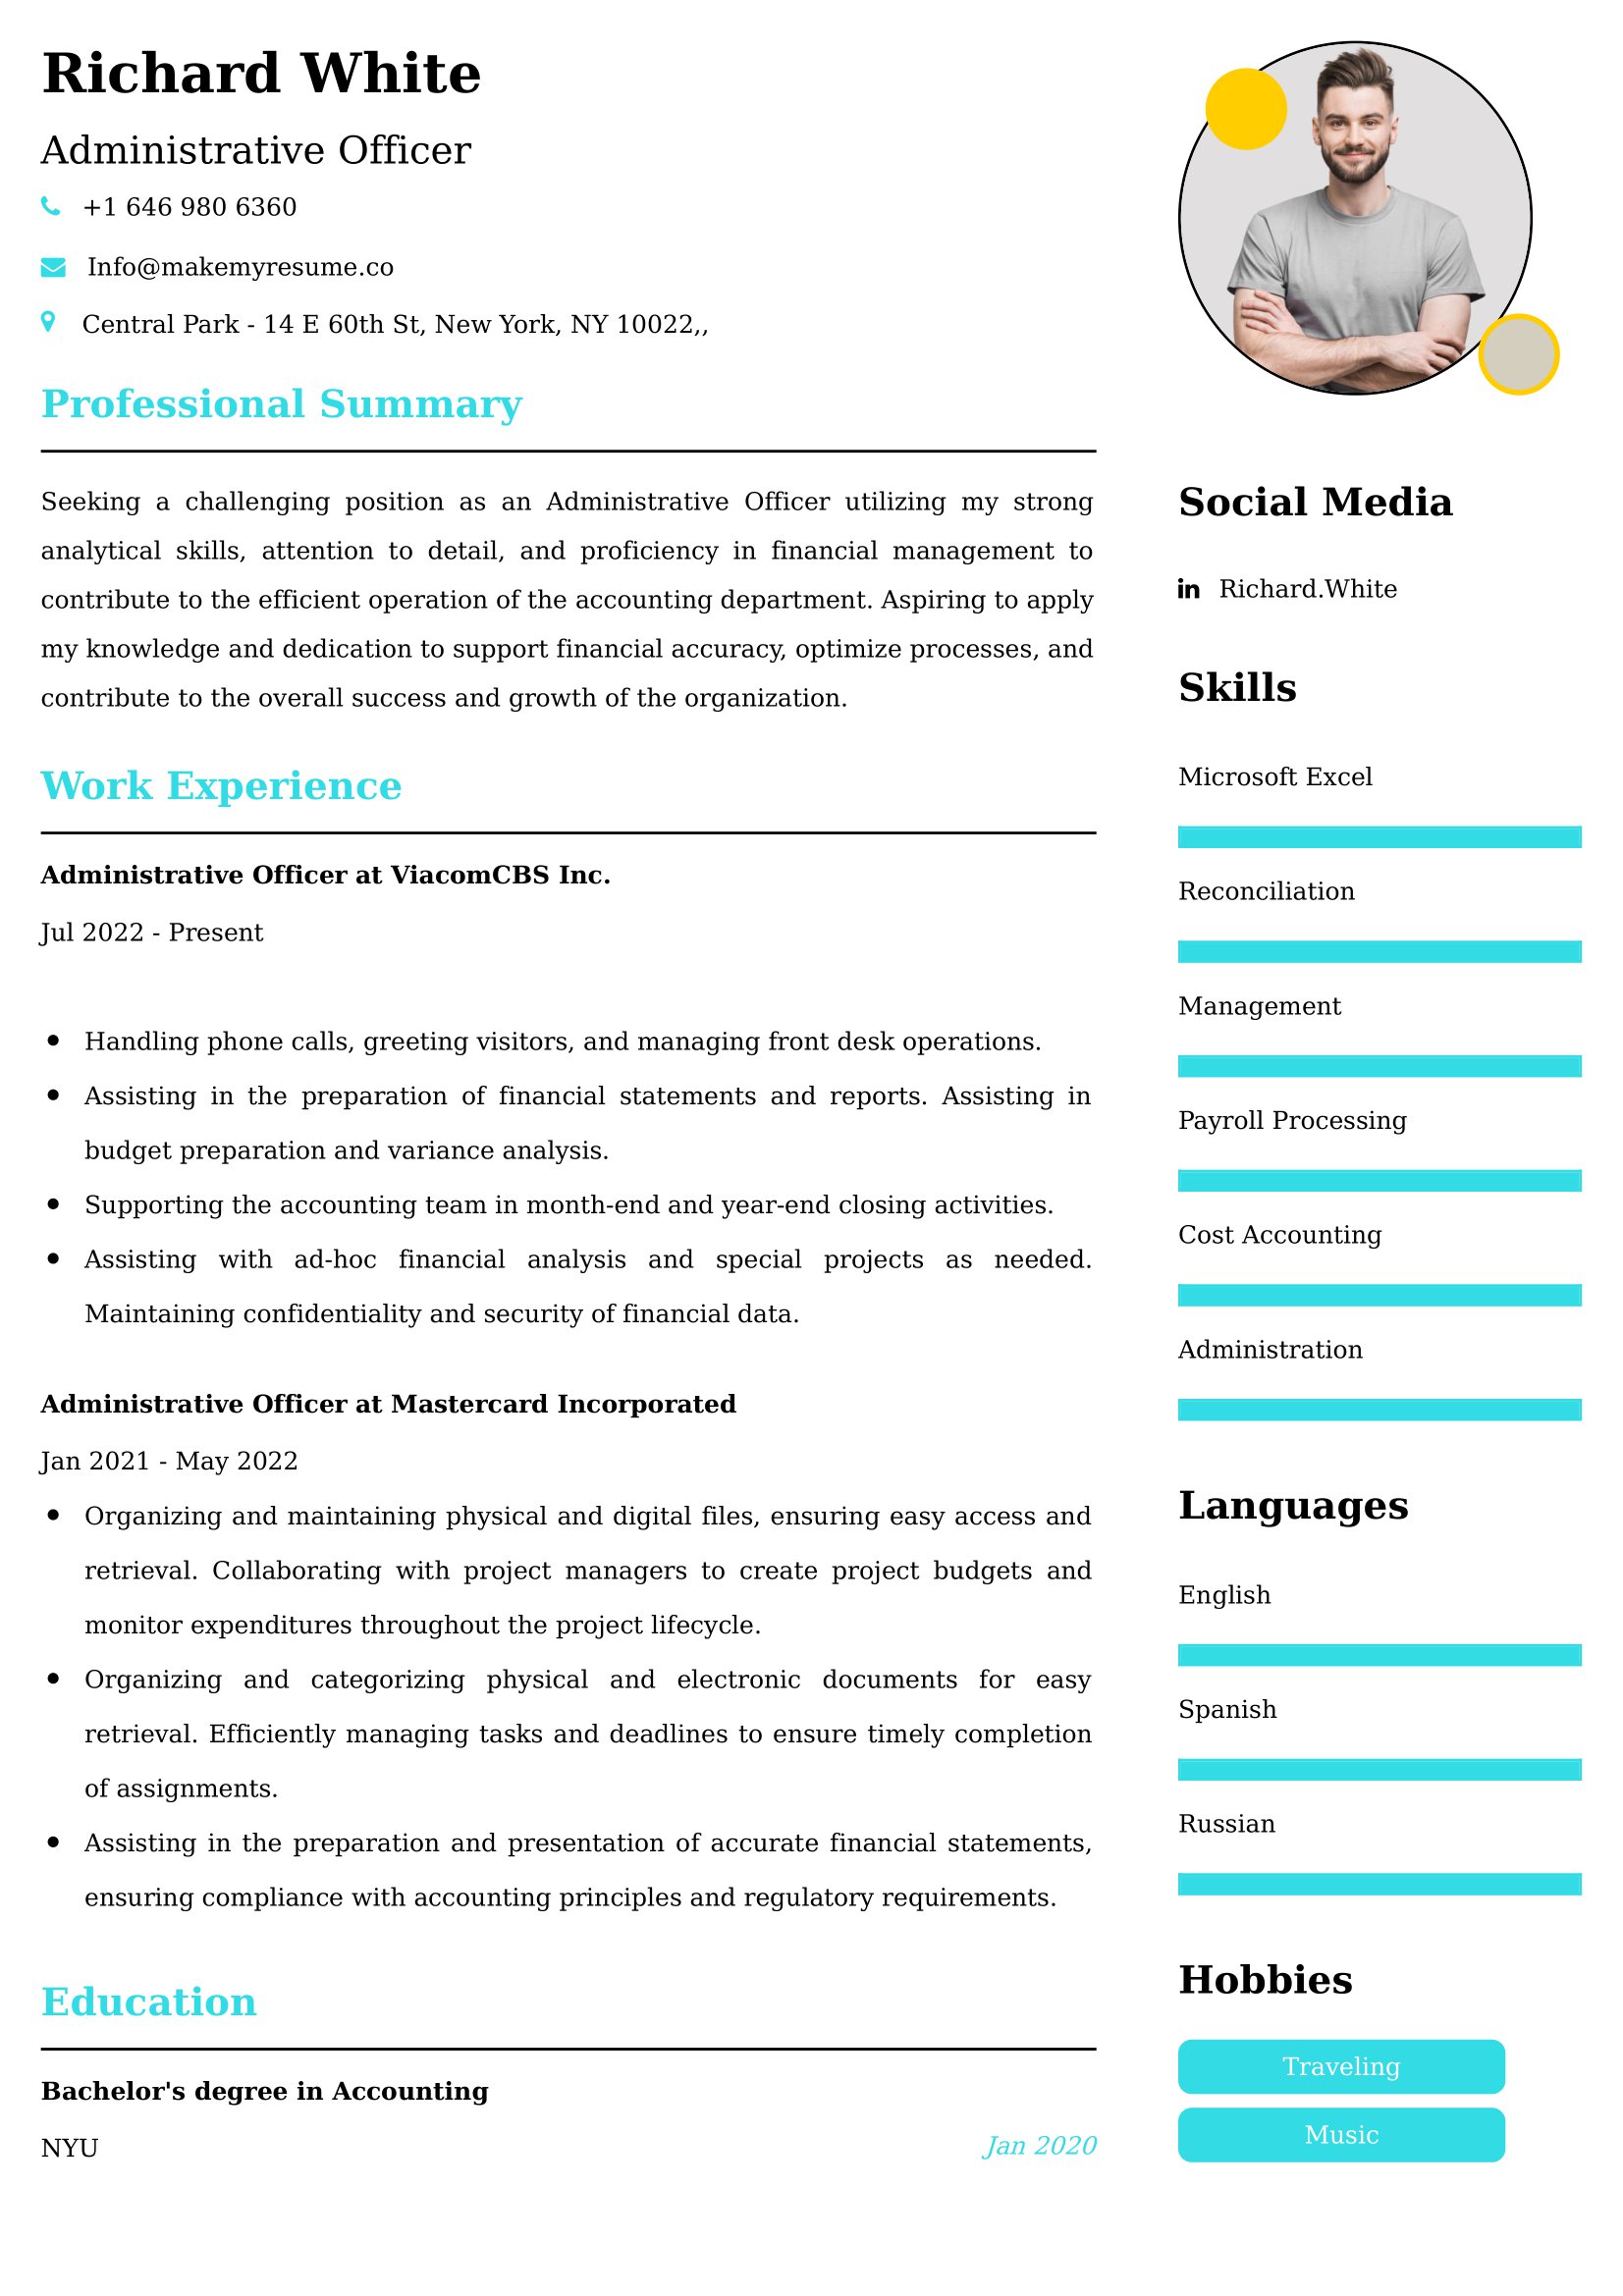 Administrative Officer Resume Examples - Australian Format and Tips